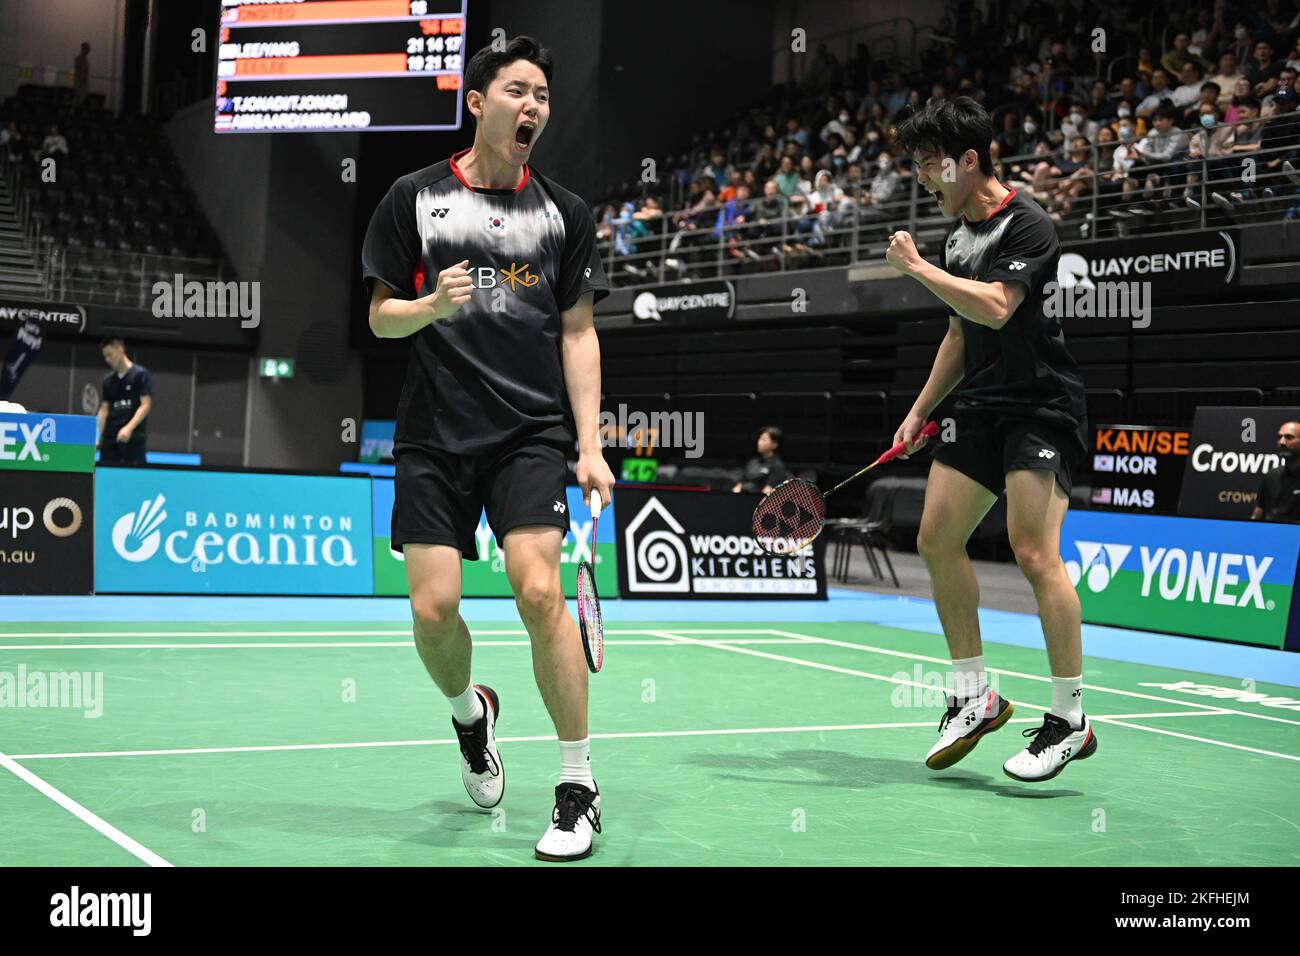 Seo Seung Jae (L) and Kang Min Hyuk (R) of Korea seen during the 2022 SATHIO GROUP Australian Badminton Open mens double quarter finals match against Ong Yew Sin and Teo Ee